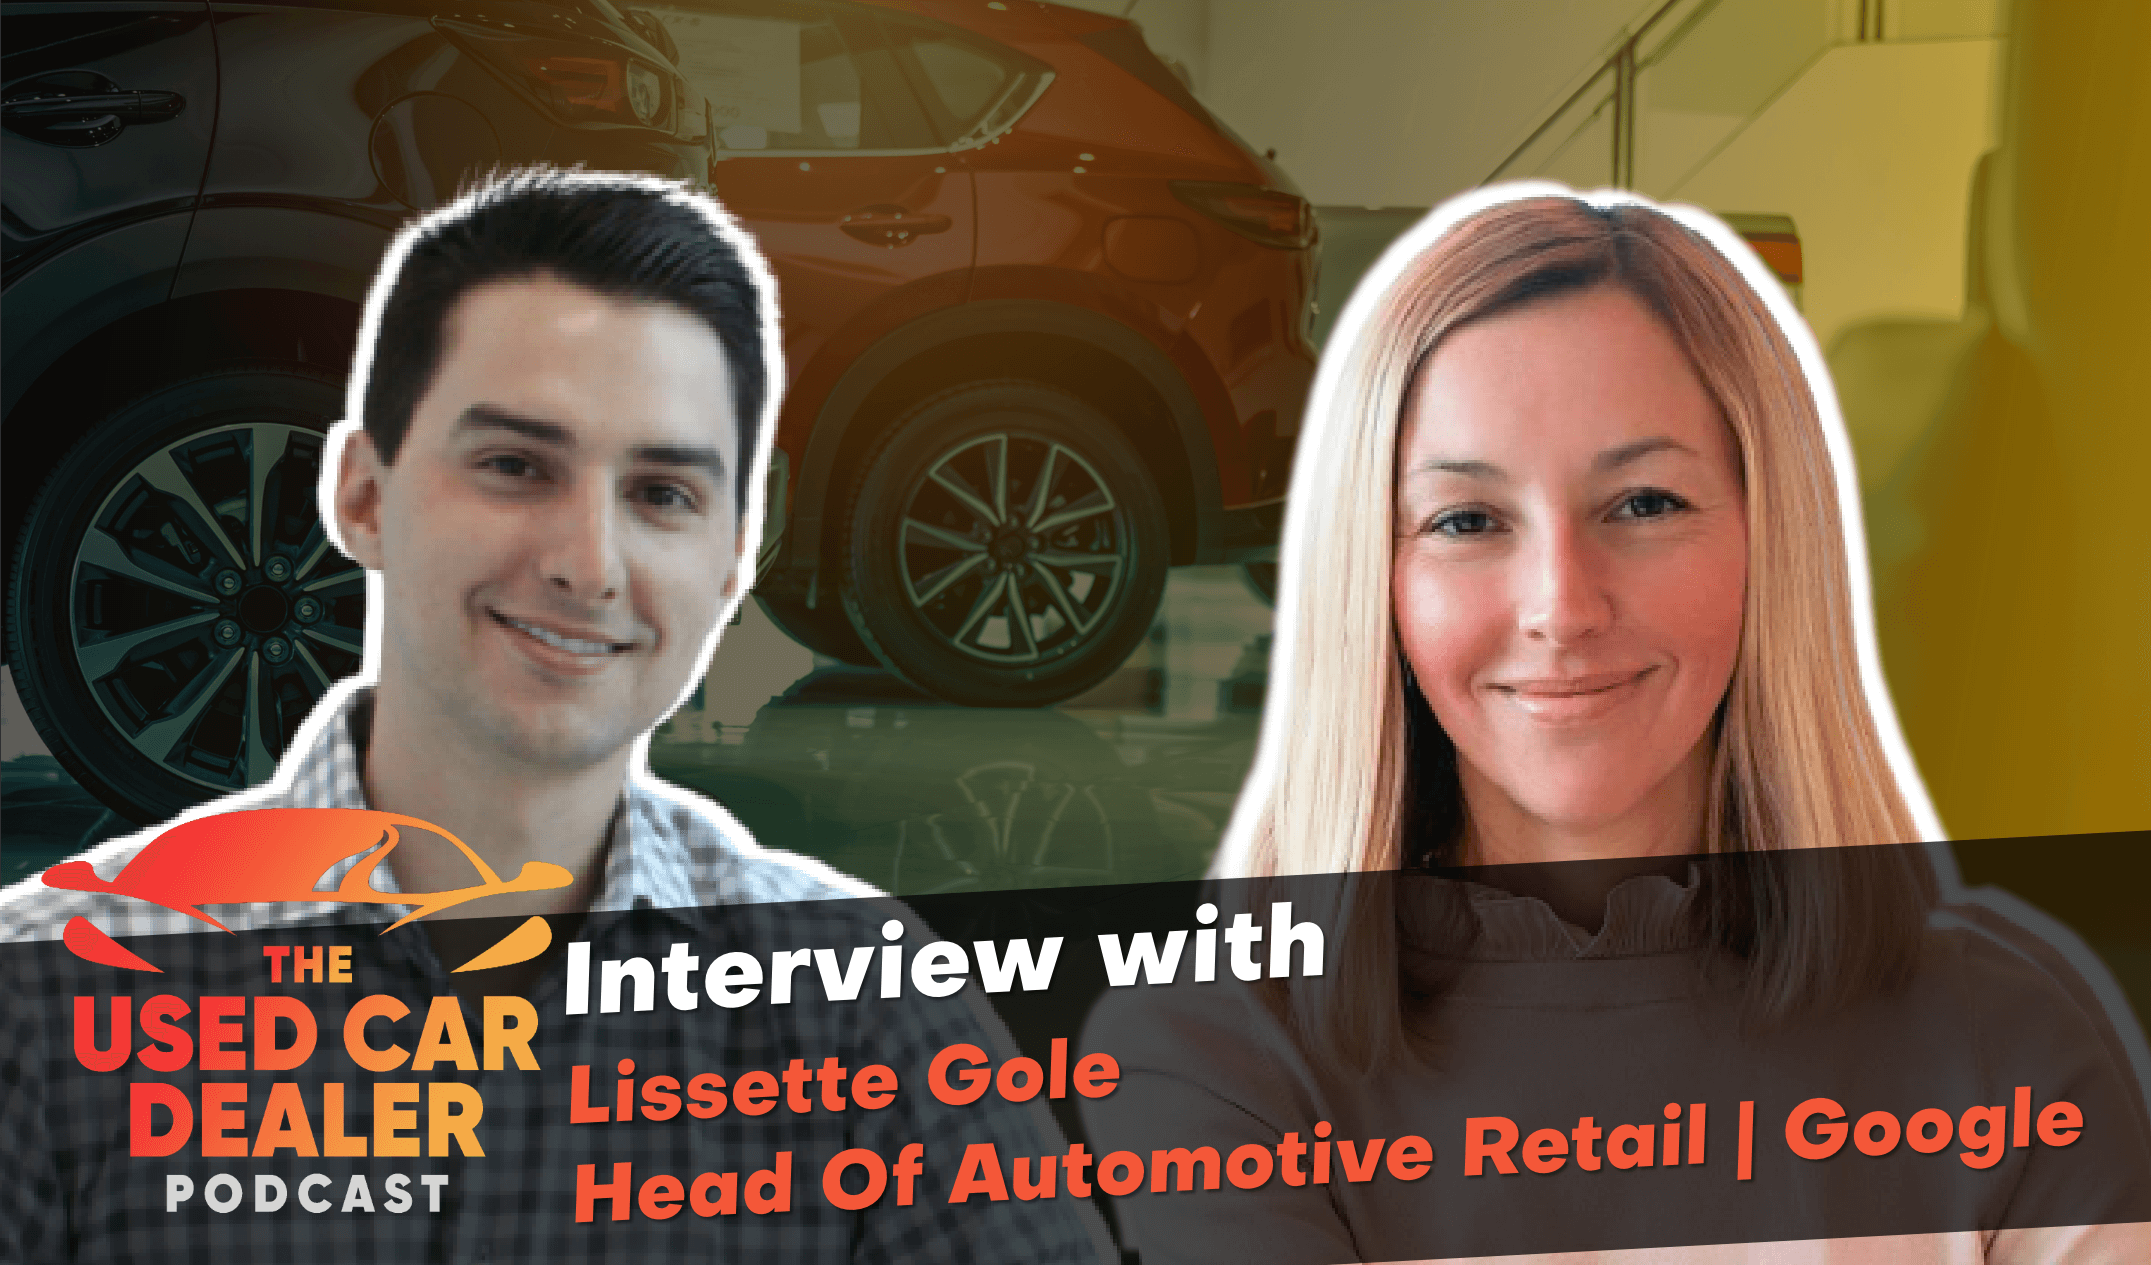 Interview with Lissette Gole Head of Automotive Retail at Google on Used Car Sales